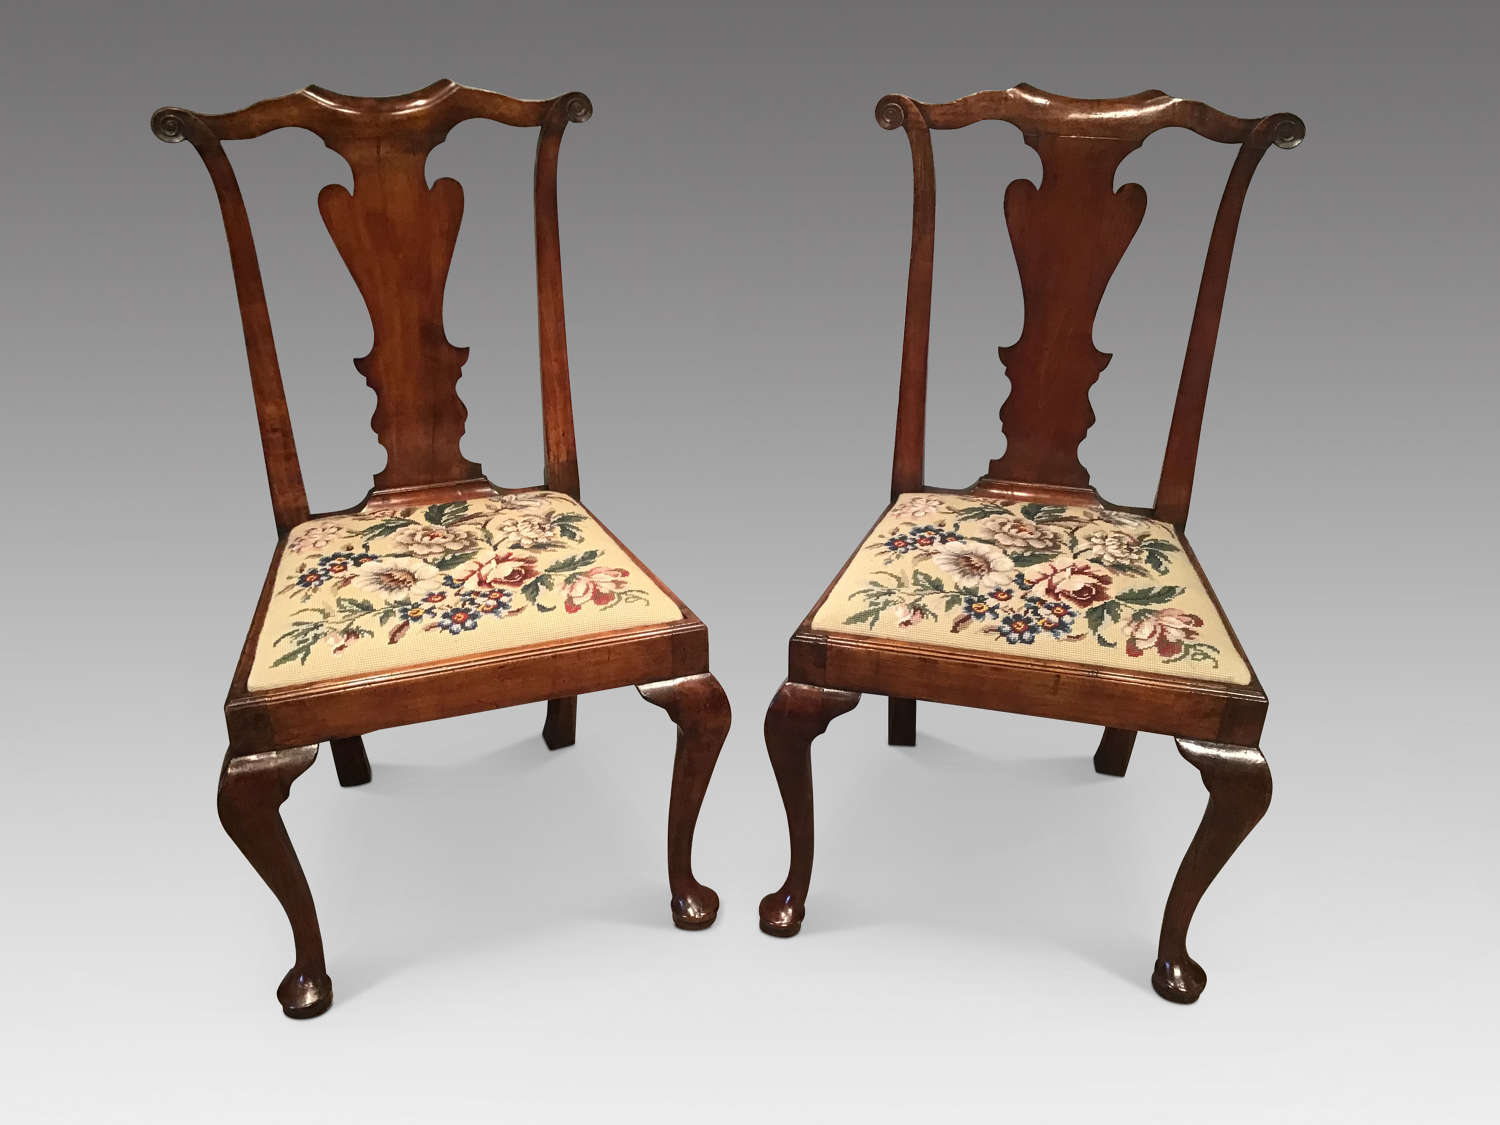 Pair of antique fruitwood chairs